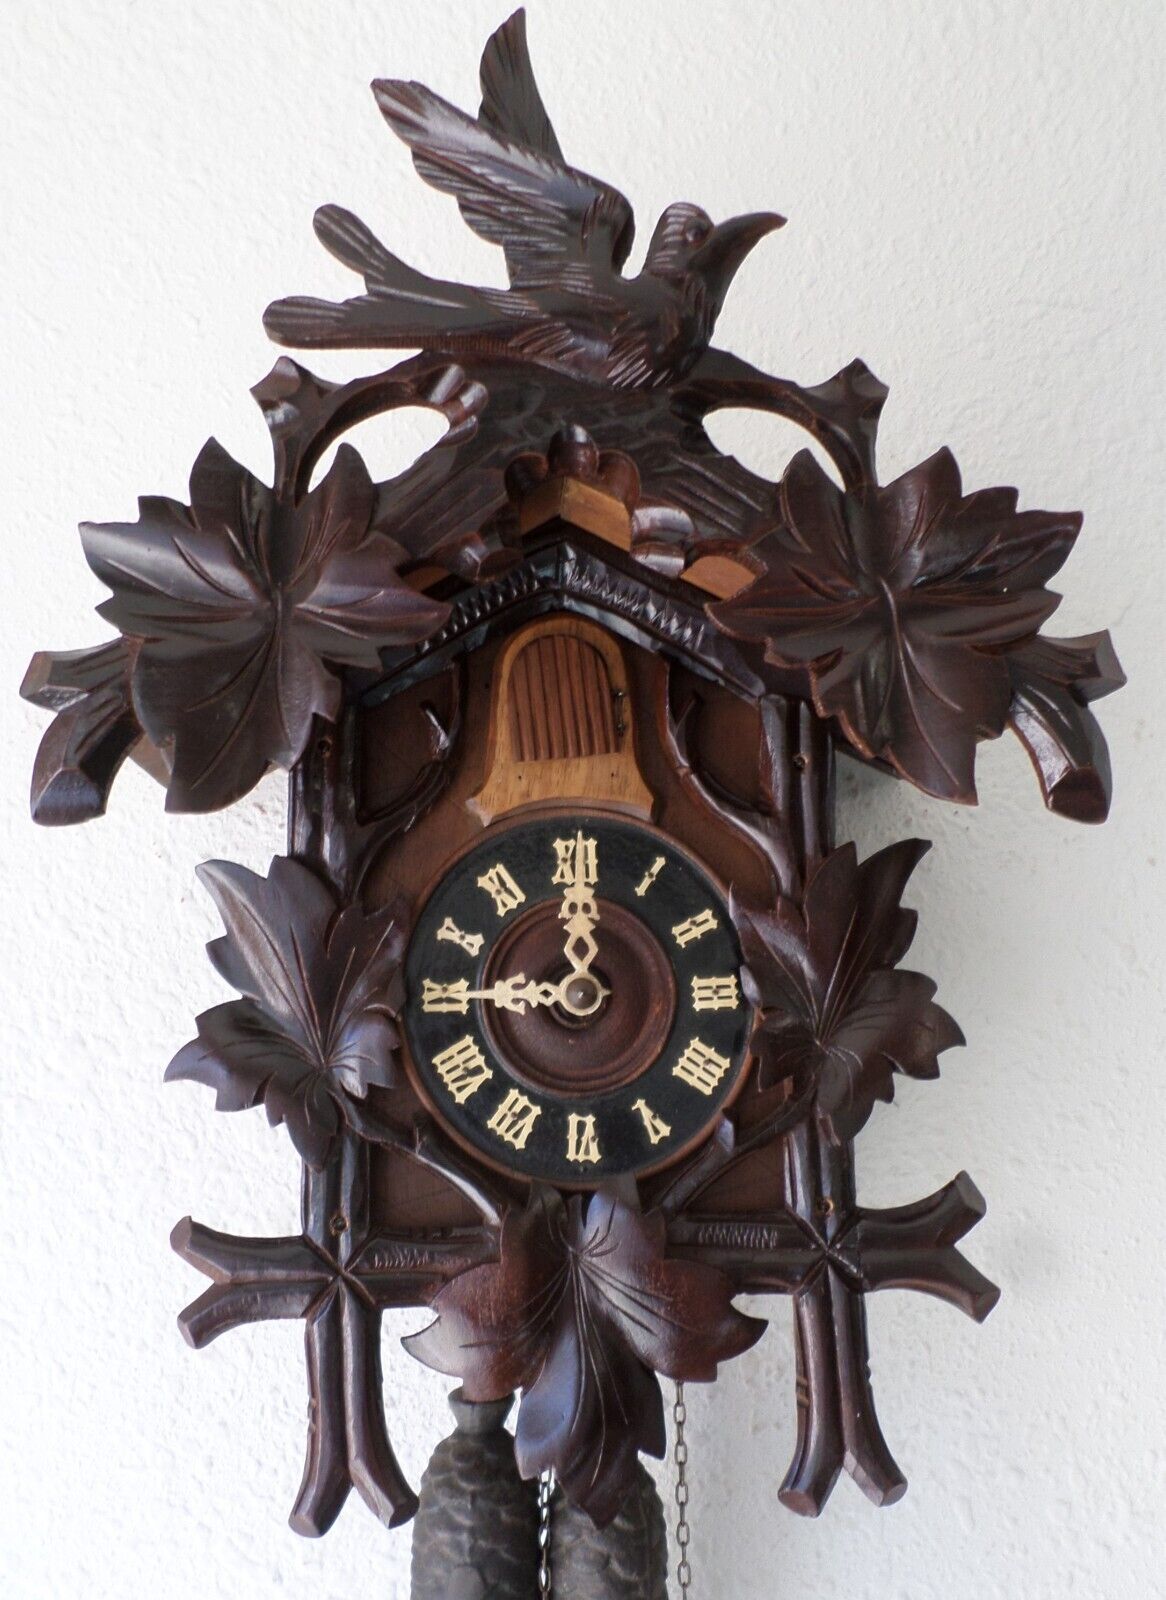 NICE LARGE ANTIQUE WORKING RARE GERMAN BLACK FOREST DEEPLY CARVED CUCKOO CLOCK